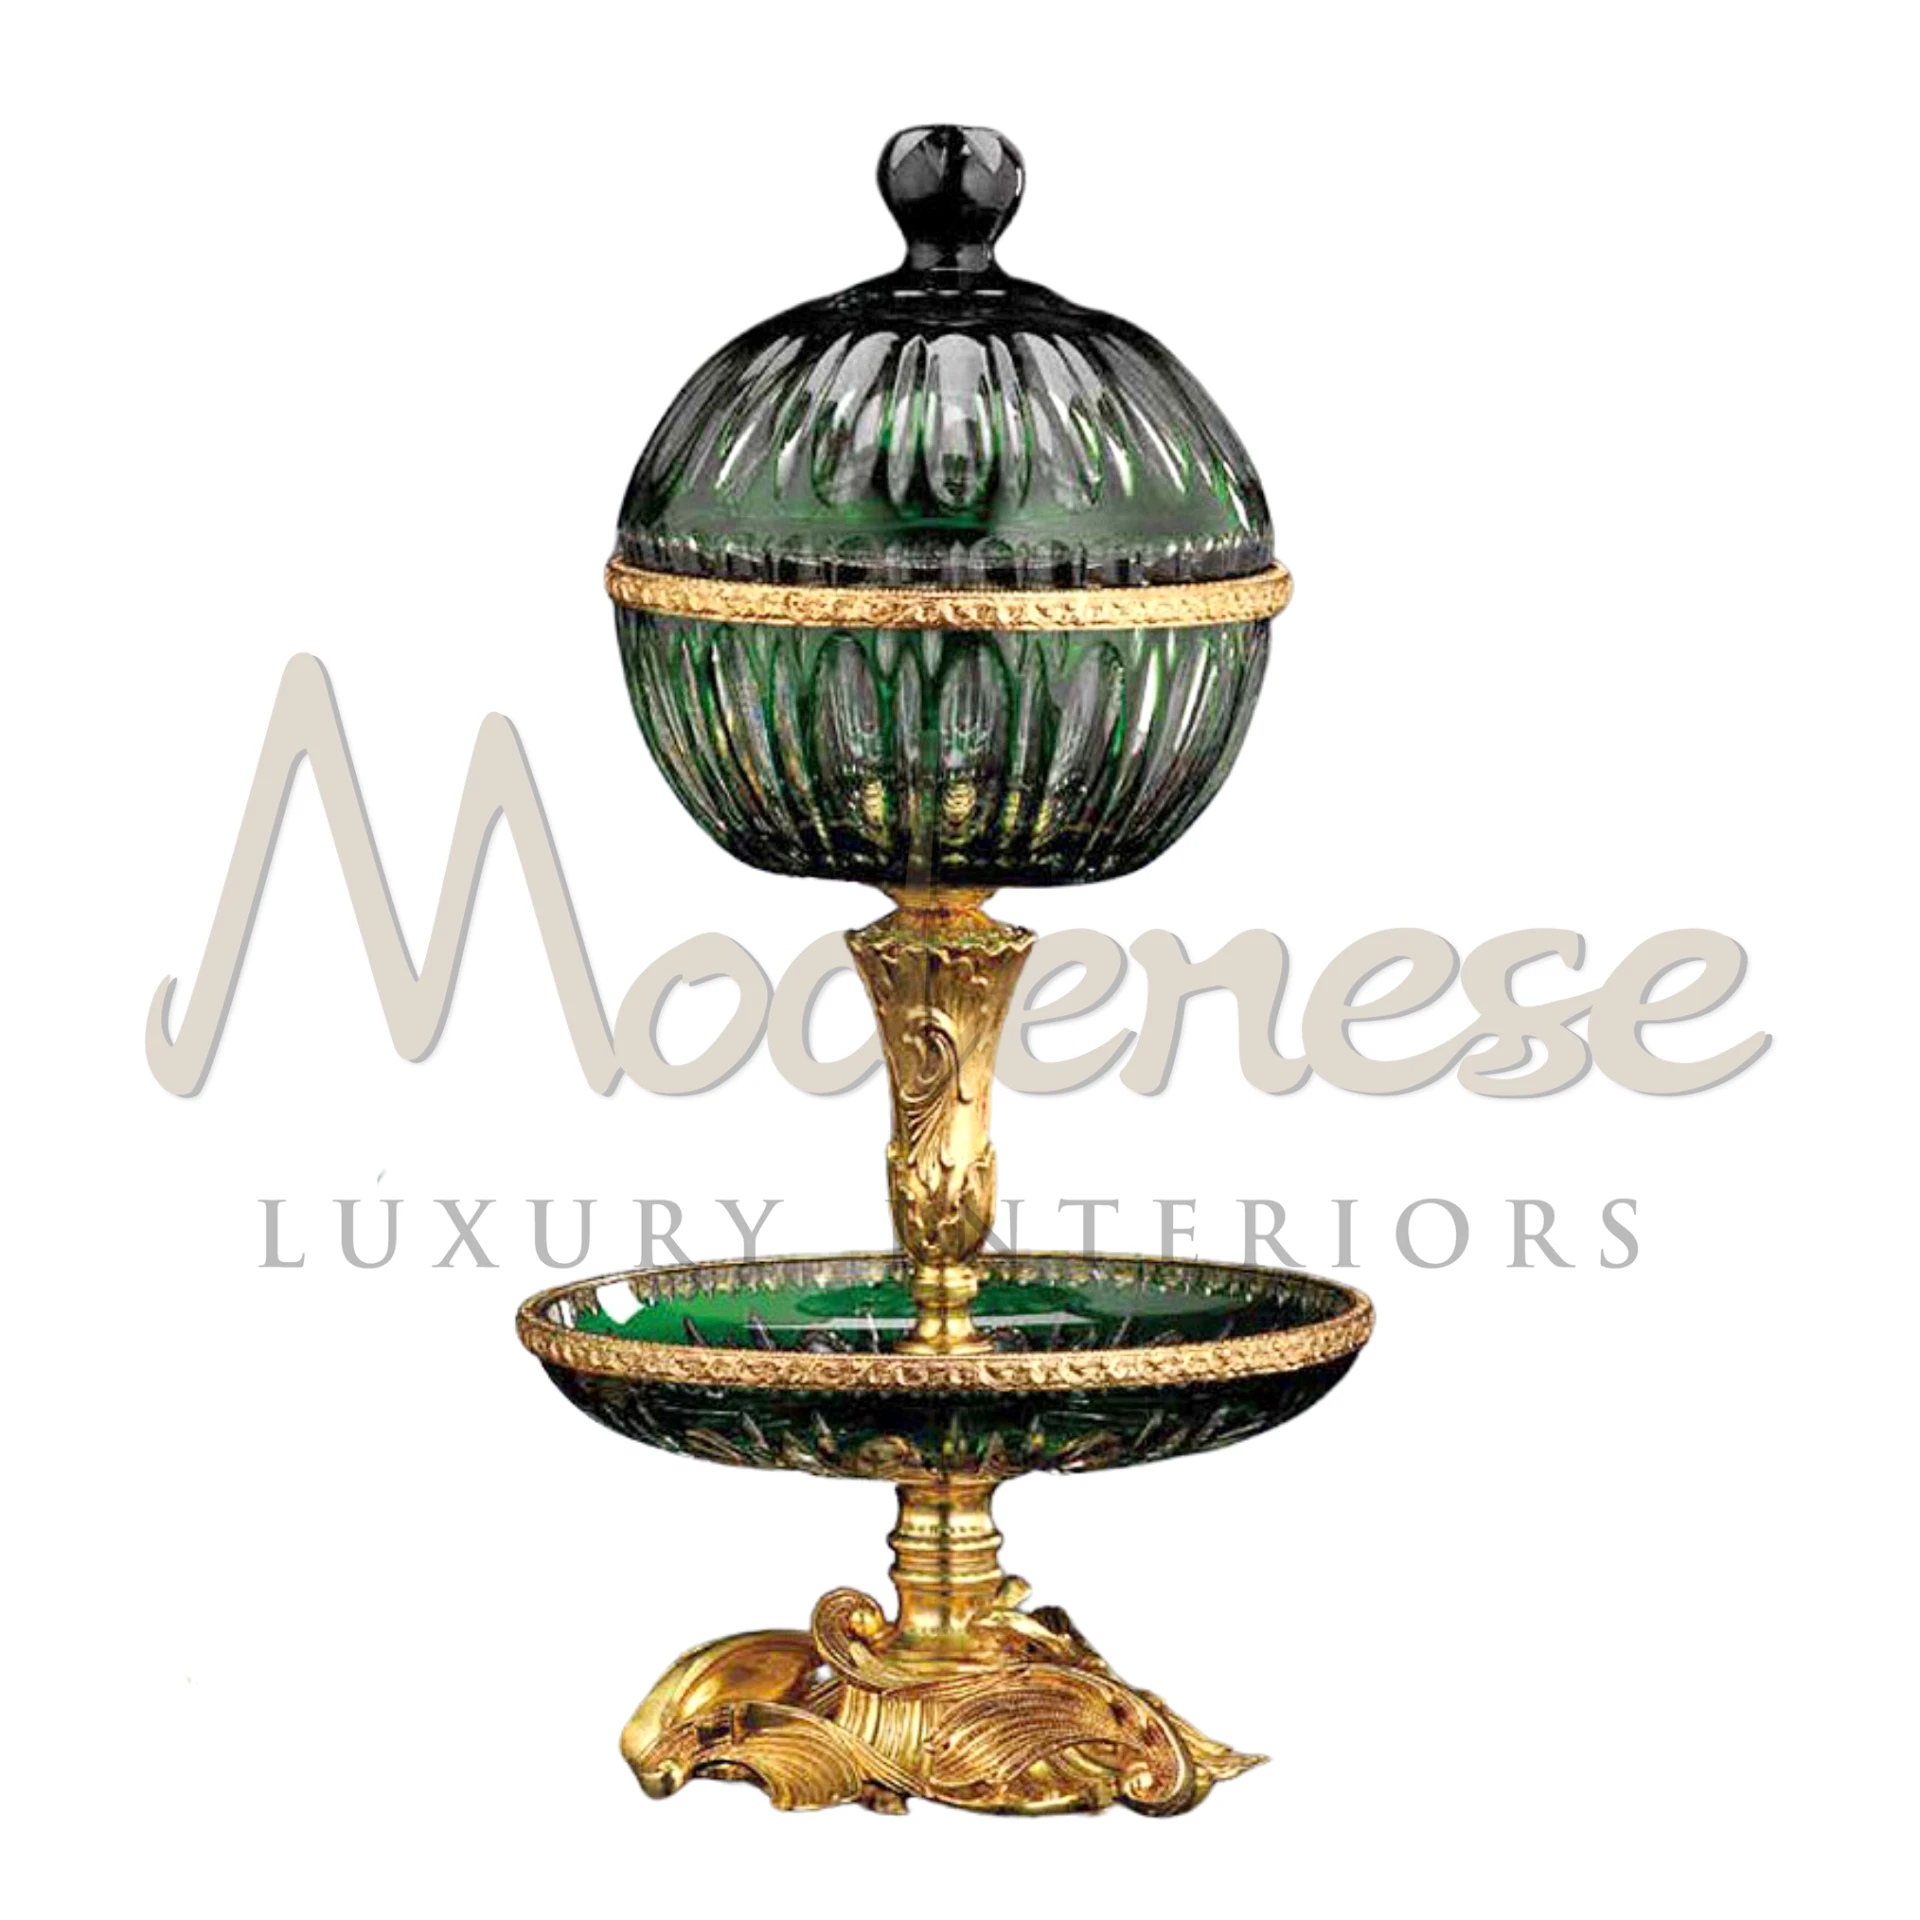 Imperial Double Deck Green Glass Bowl, crafted with elegance, featuring a unique two-tier design in a rich green color.